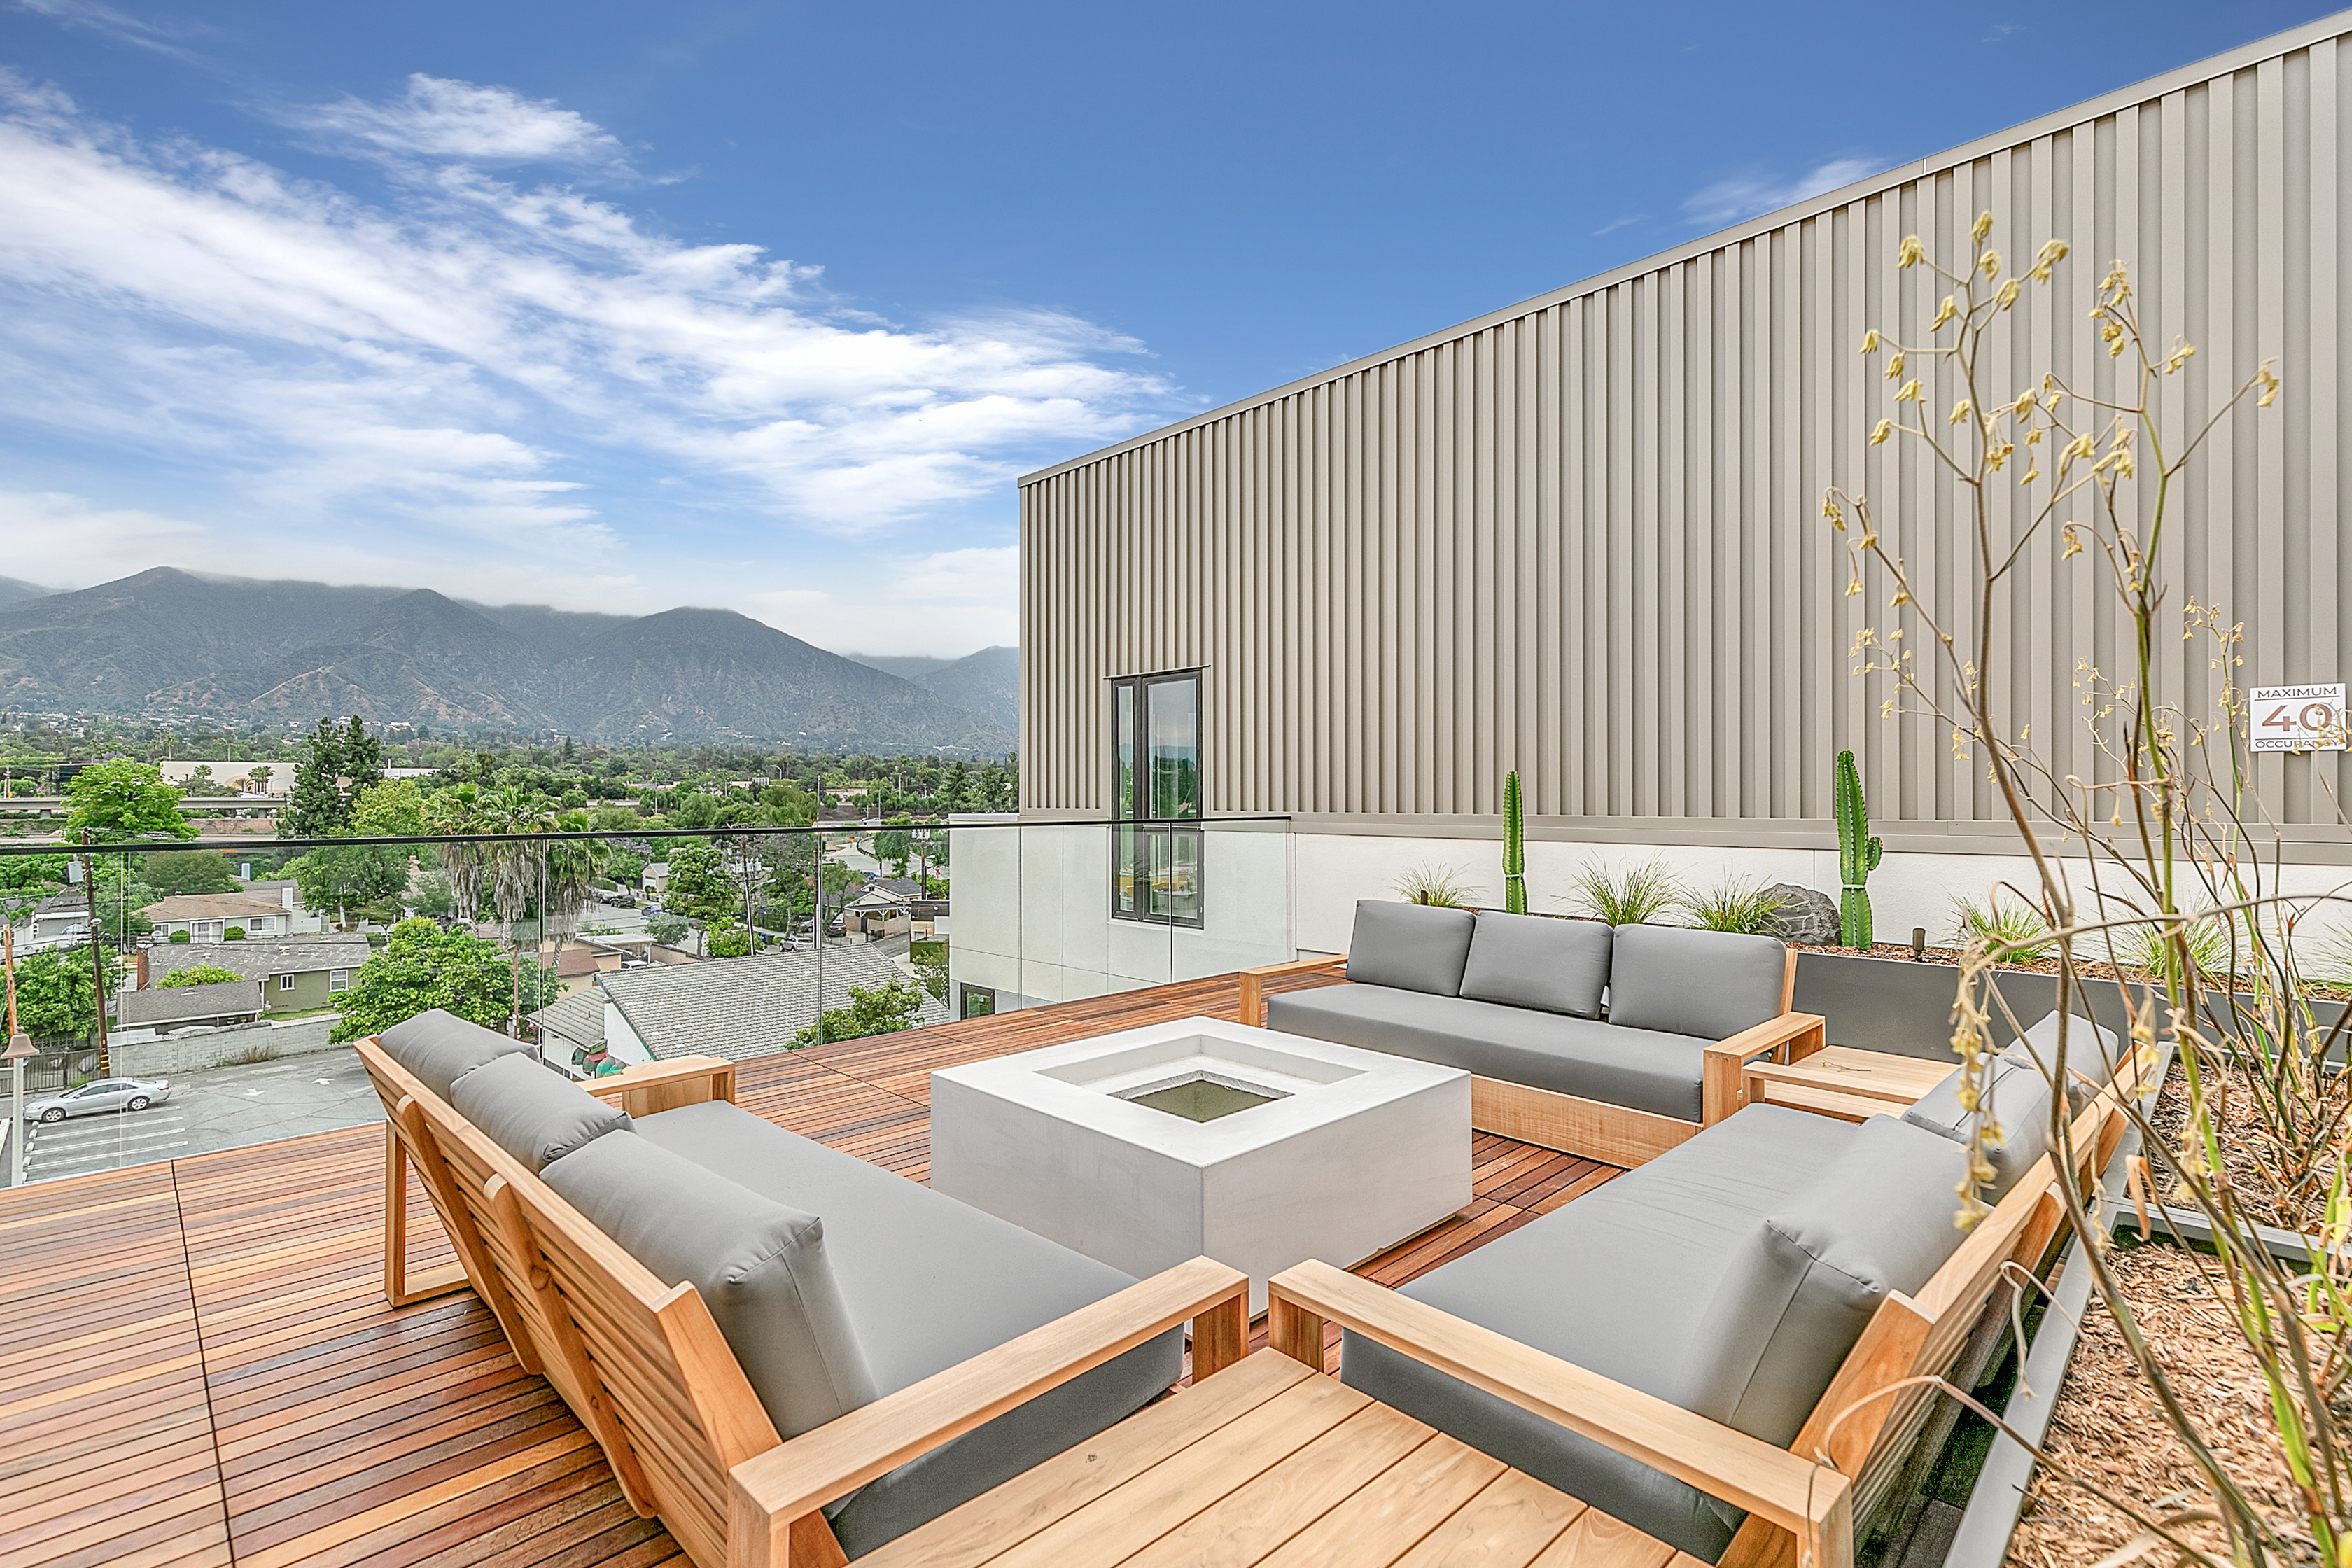 The Rinrose apartment with a rooftop deck and furniture overlooking the mountains.